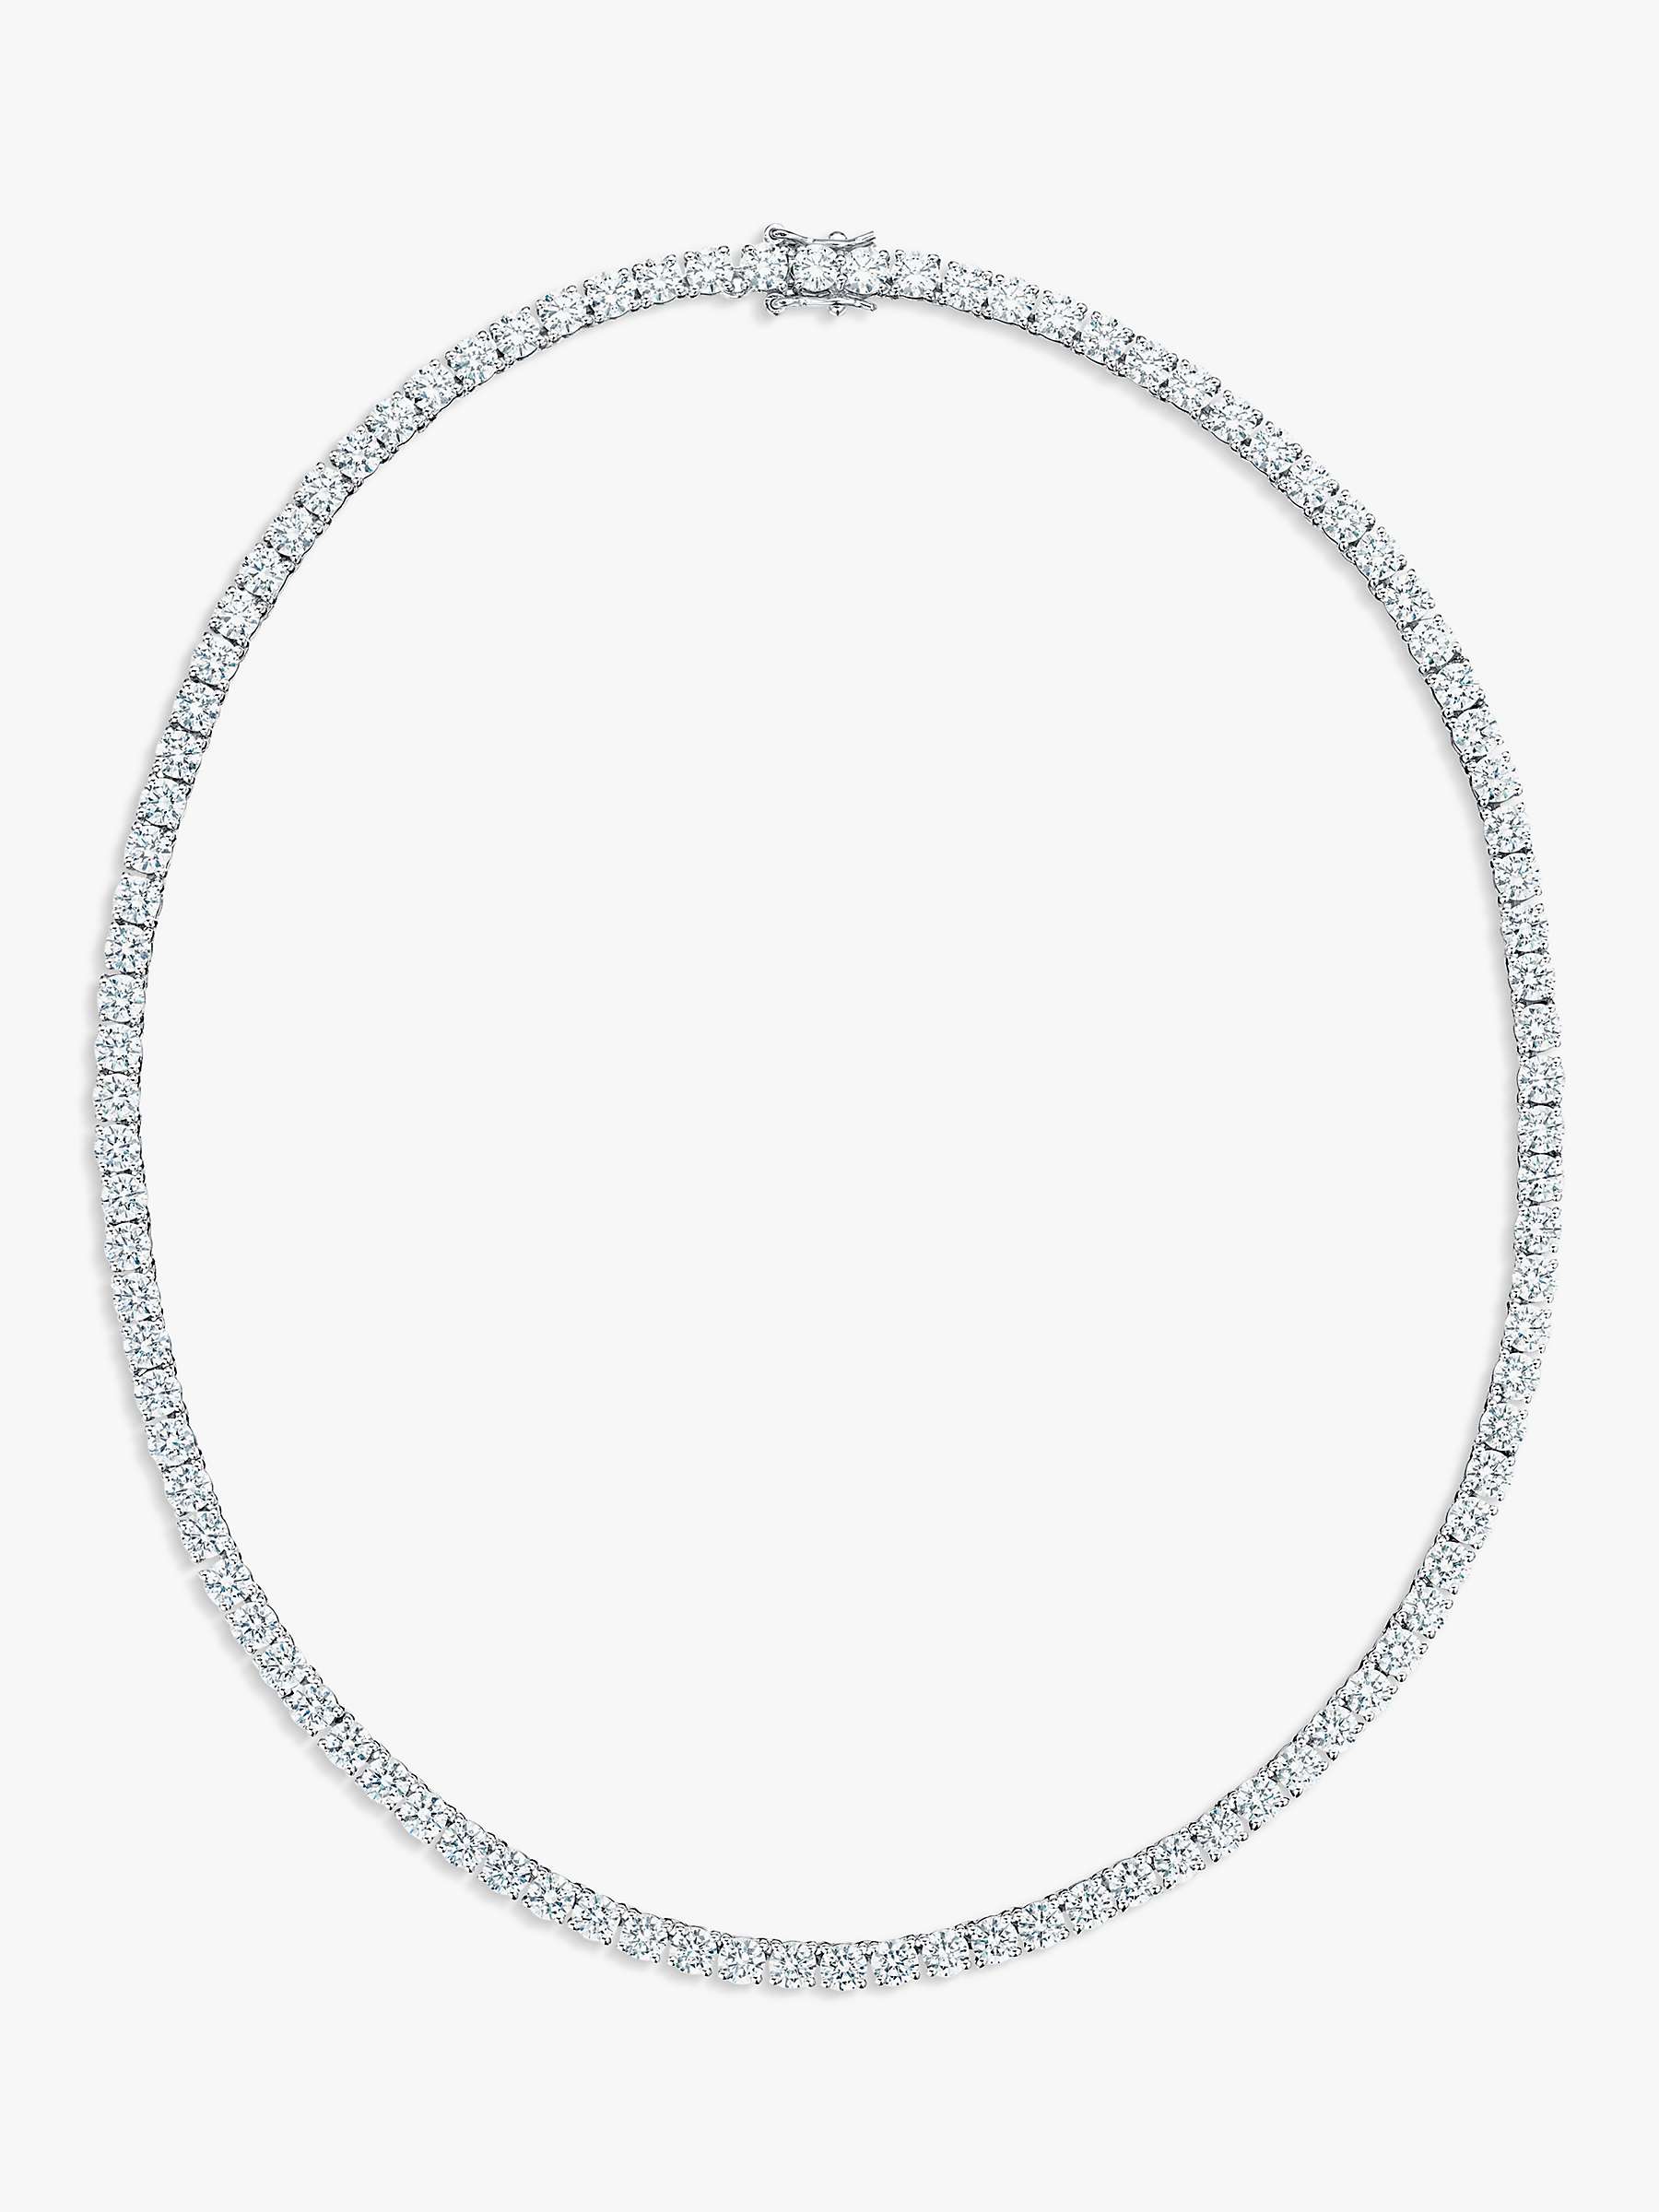 Buy Jools by Jenny Brown Brilliant Cut Cubic Zirconia Sterling Silver Tennis Necklace Online at johnlewis.com